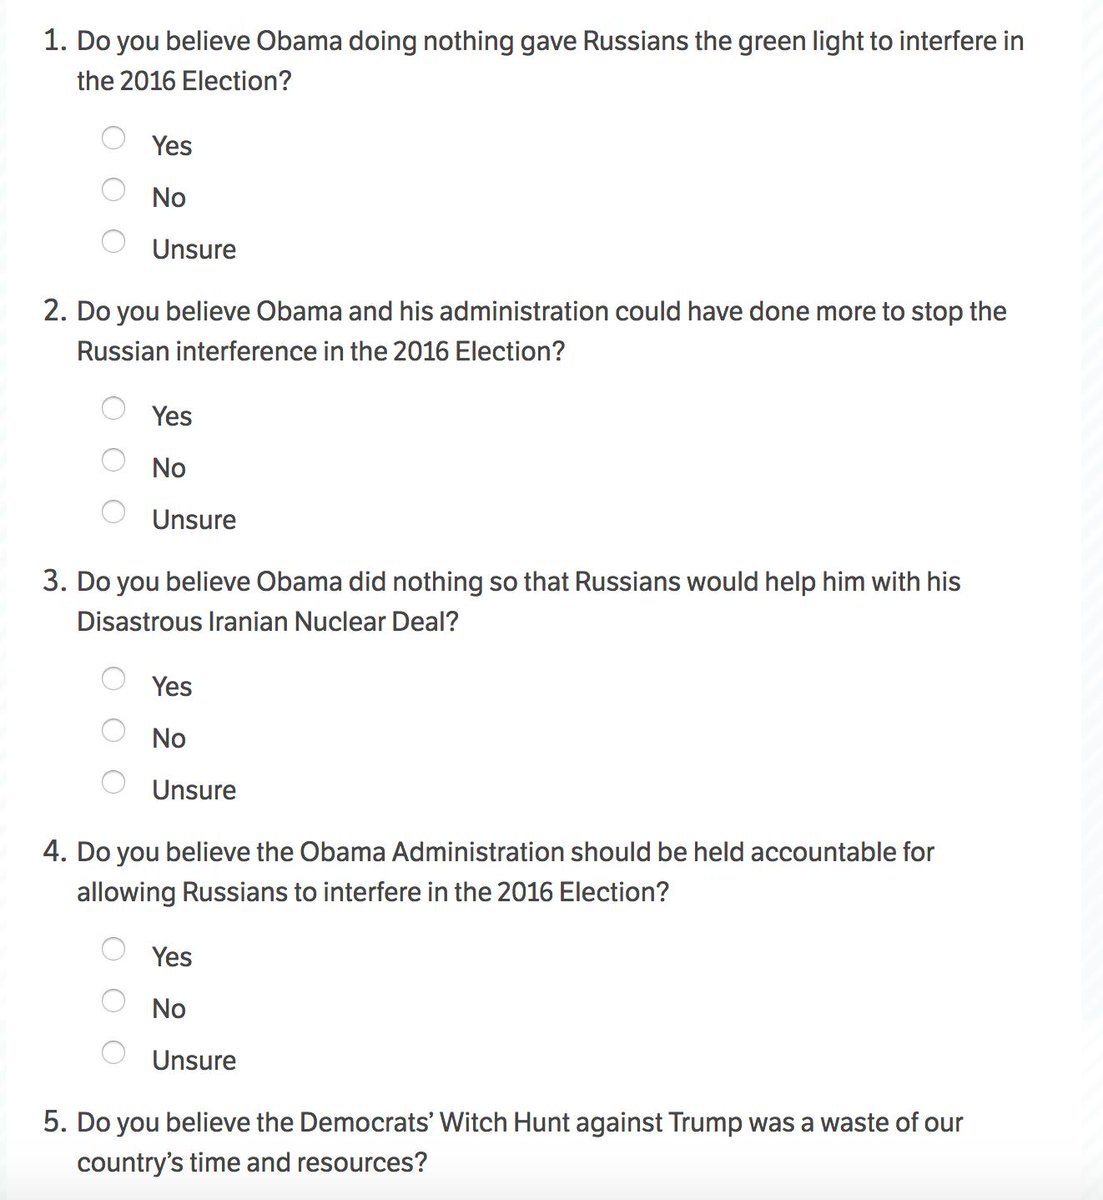 Your daily brainwashing. Check out poll questions about Obama and Russia.